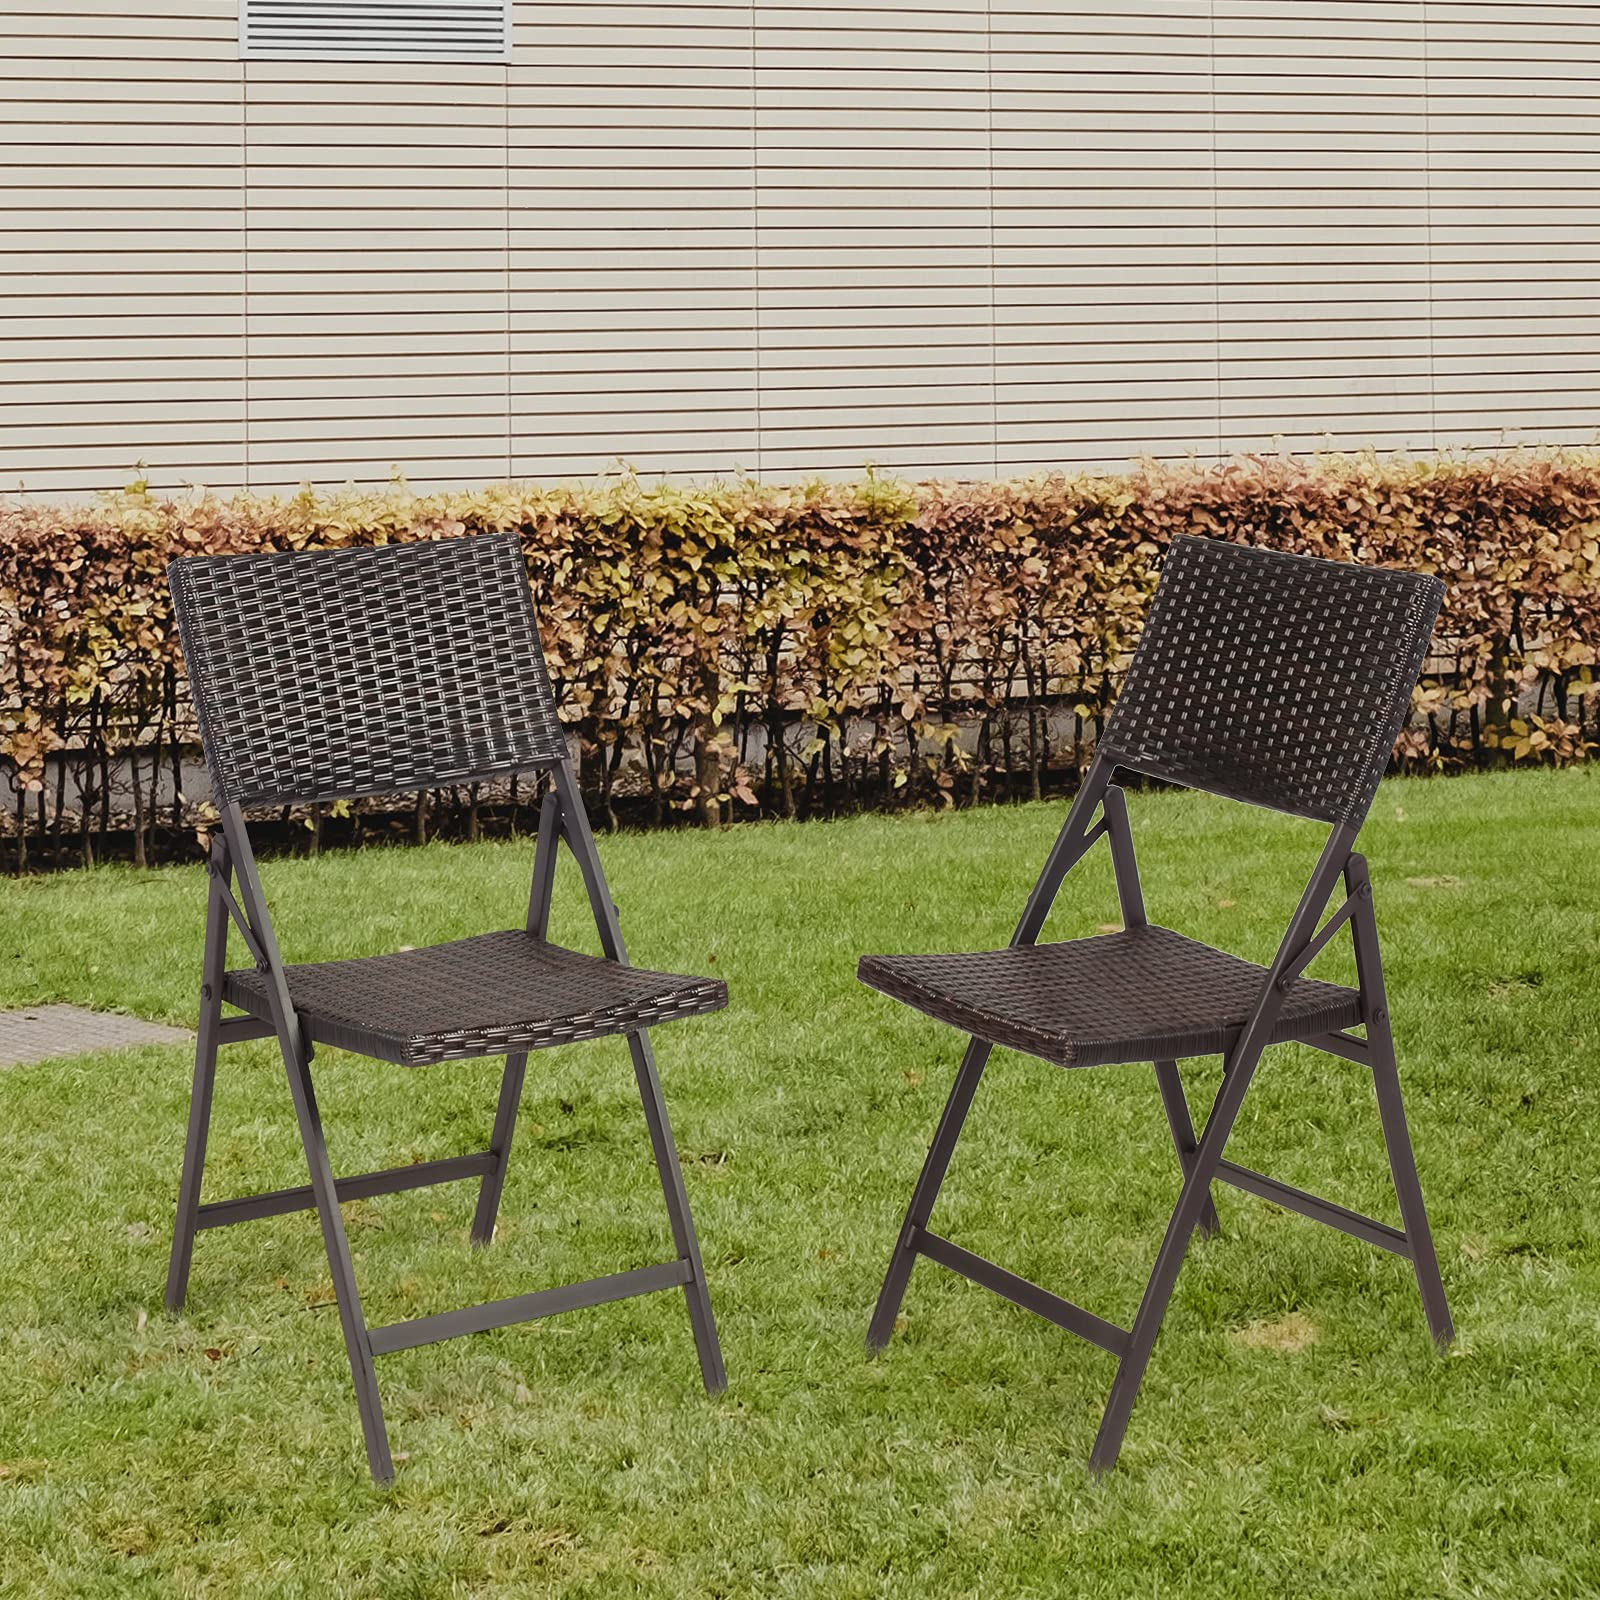 Giantex Set of 2 Patio Chairs, Folding Rattan Lawn Chairs with Armrest